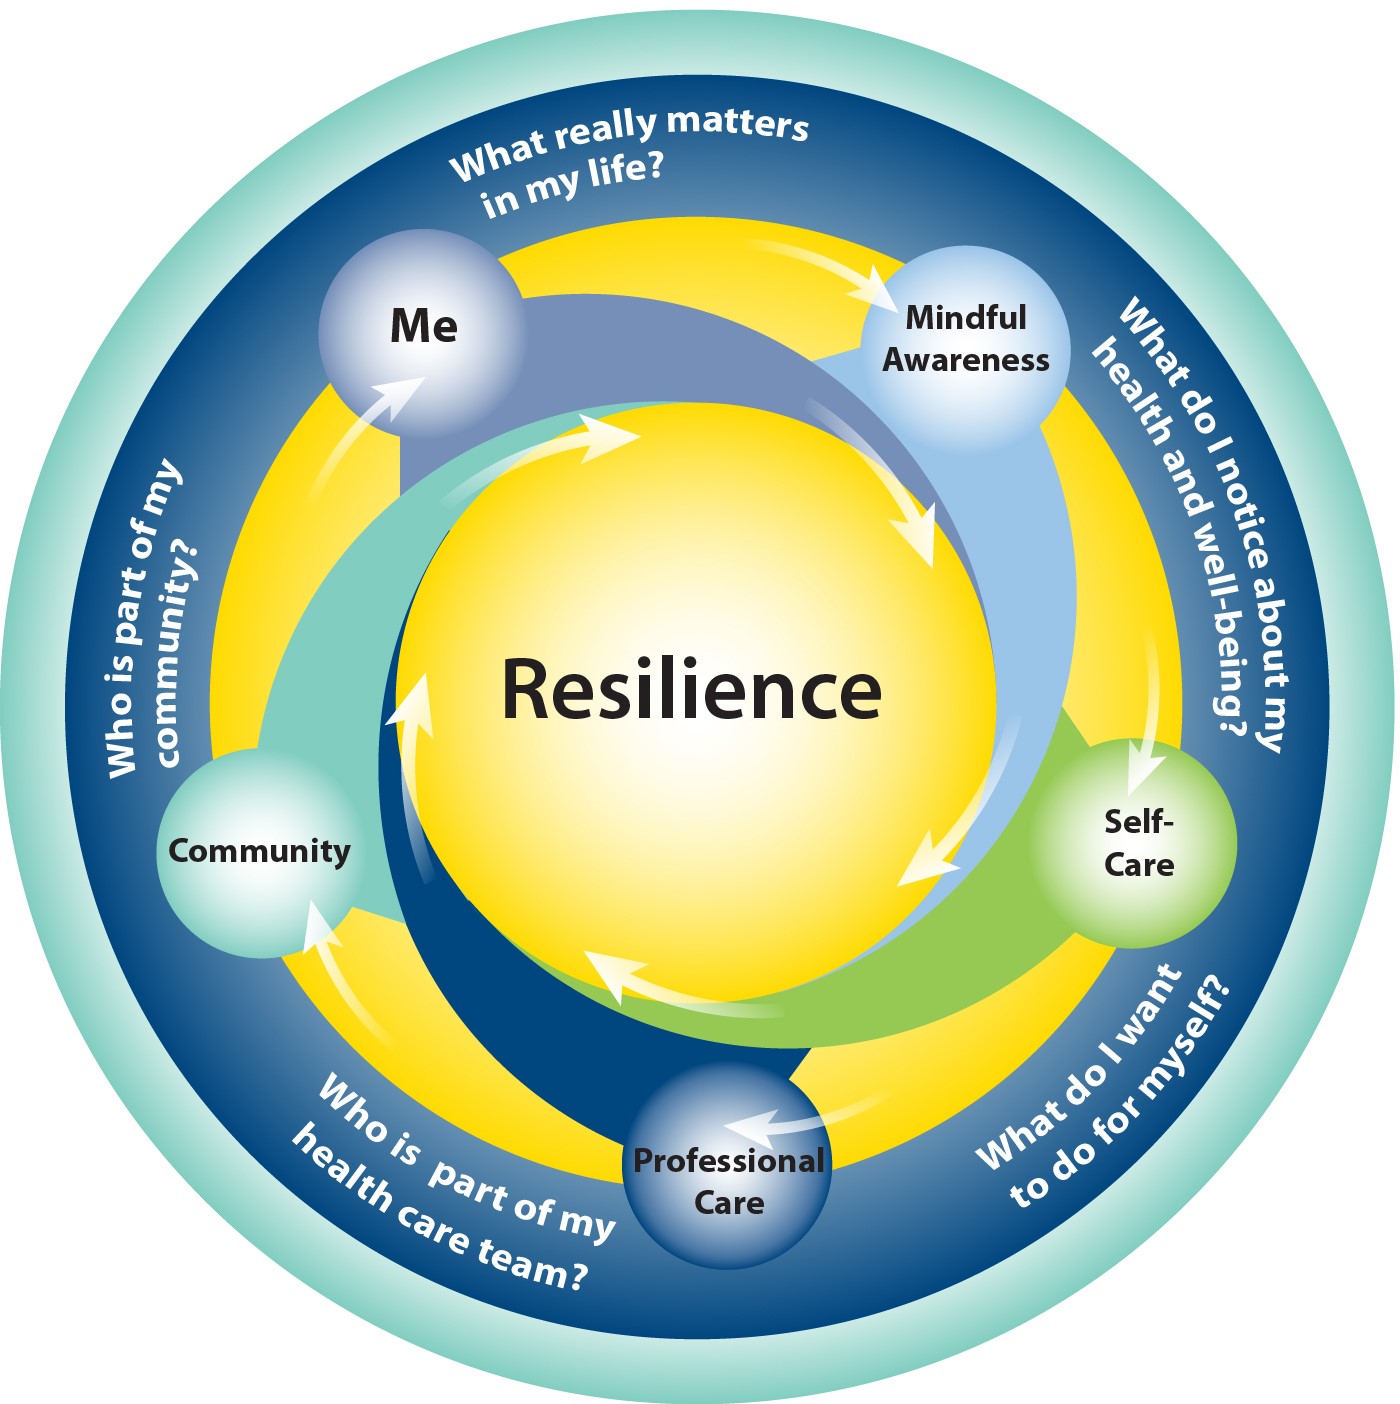 At the center is resilience. The circle consists of me (what really matters in my life?), leading to mindful awareness (what do I notice about my health and well-being), leading to self-care (what do I want to do for myself), leading to professional care (who is part of my health care team) leading to community (who is part of my community?), leading to me, where the cycle repeats.